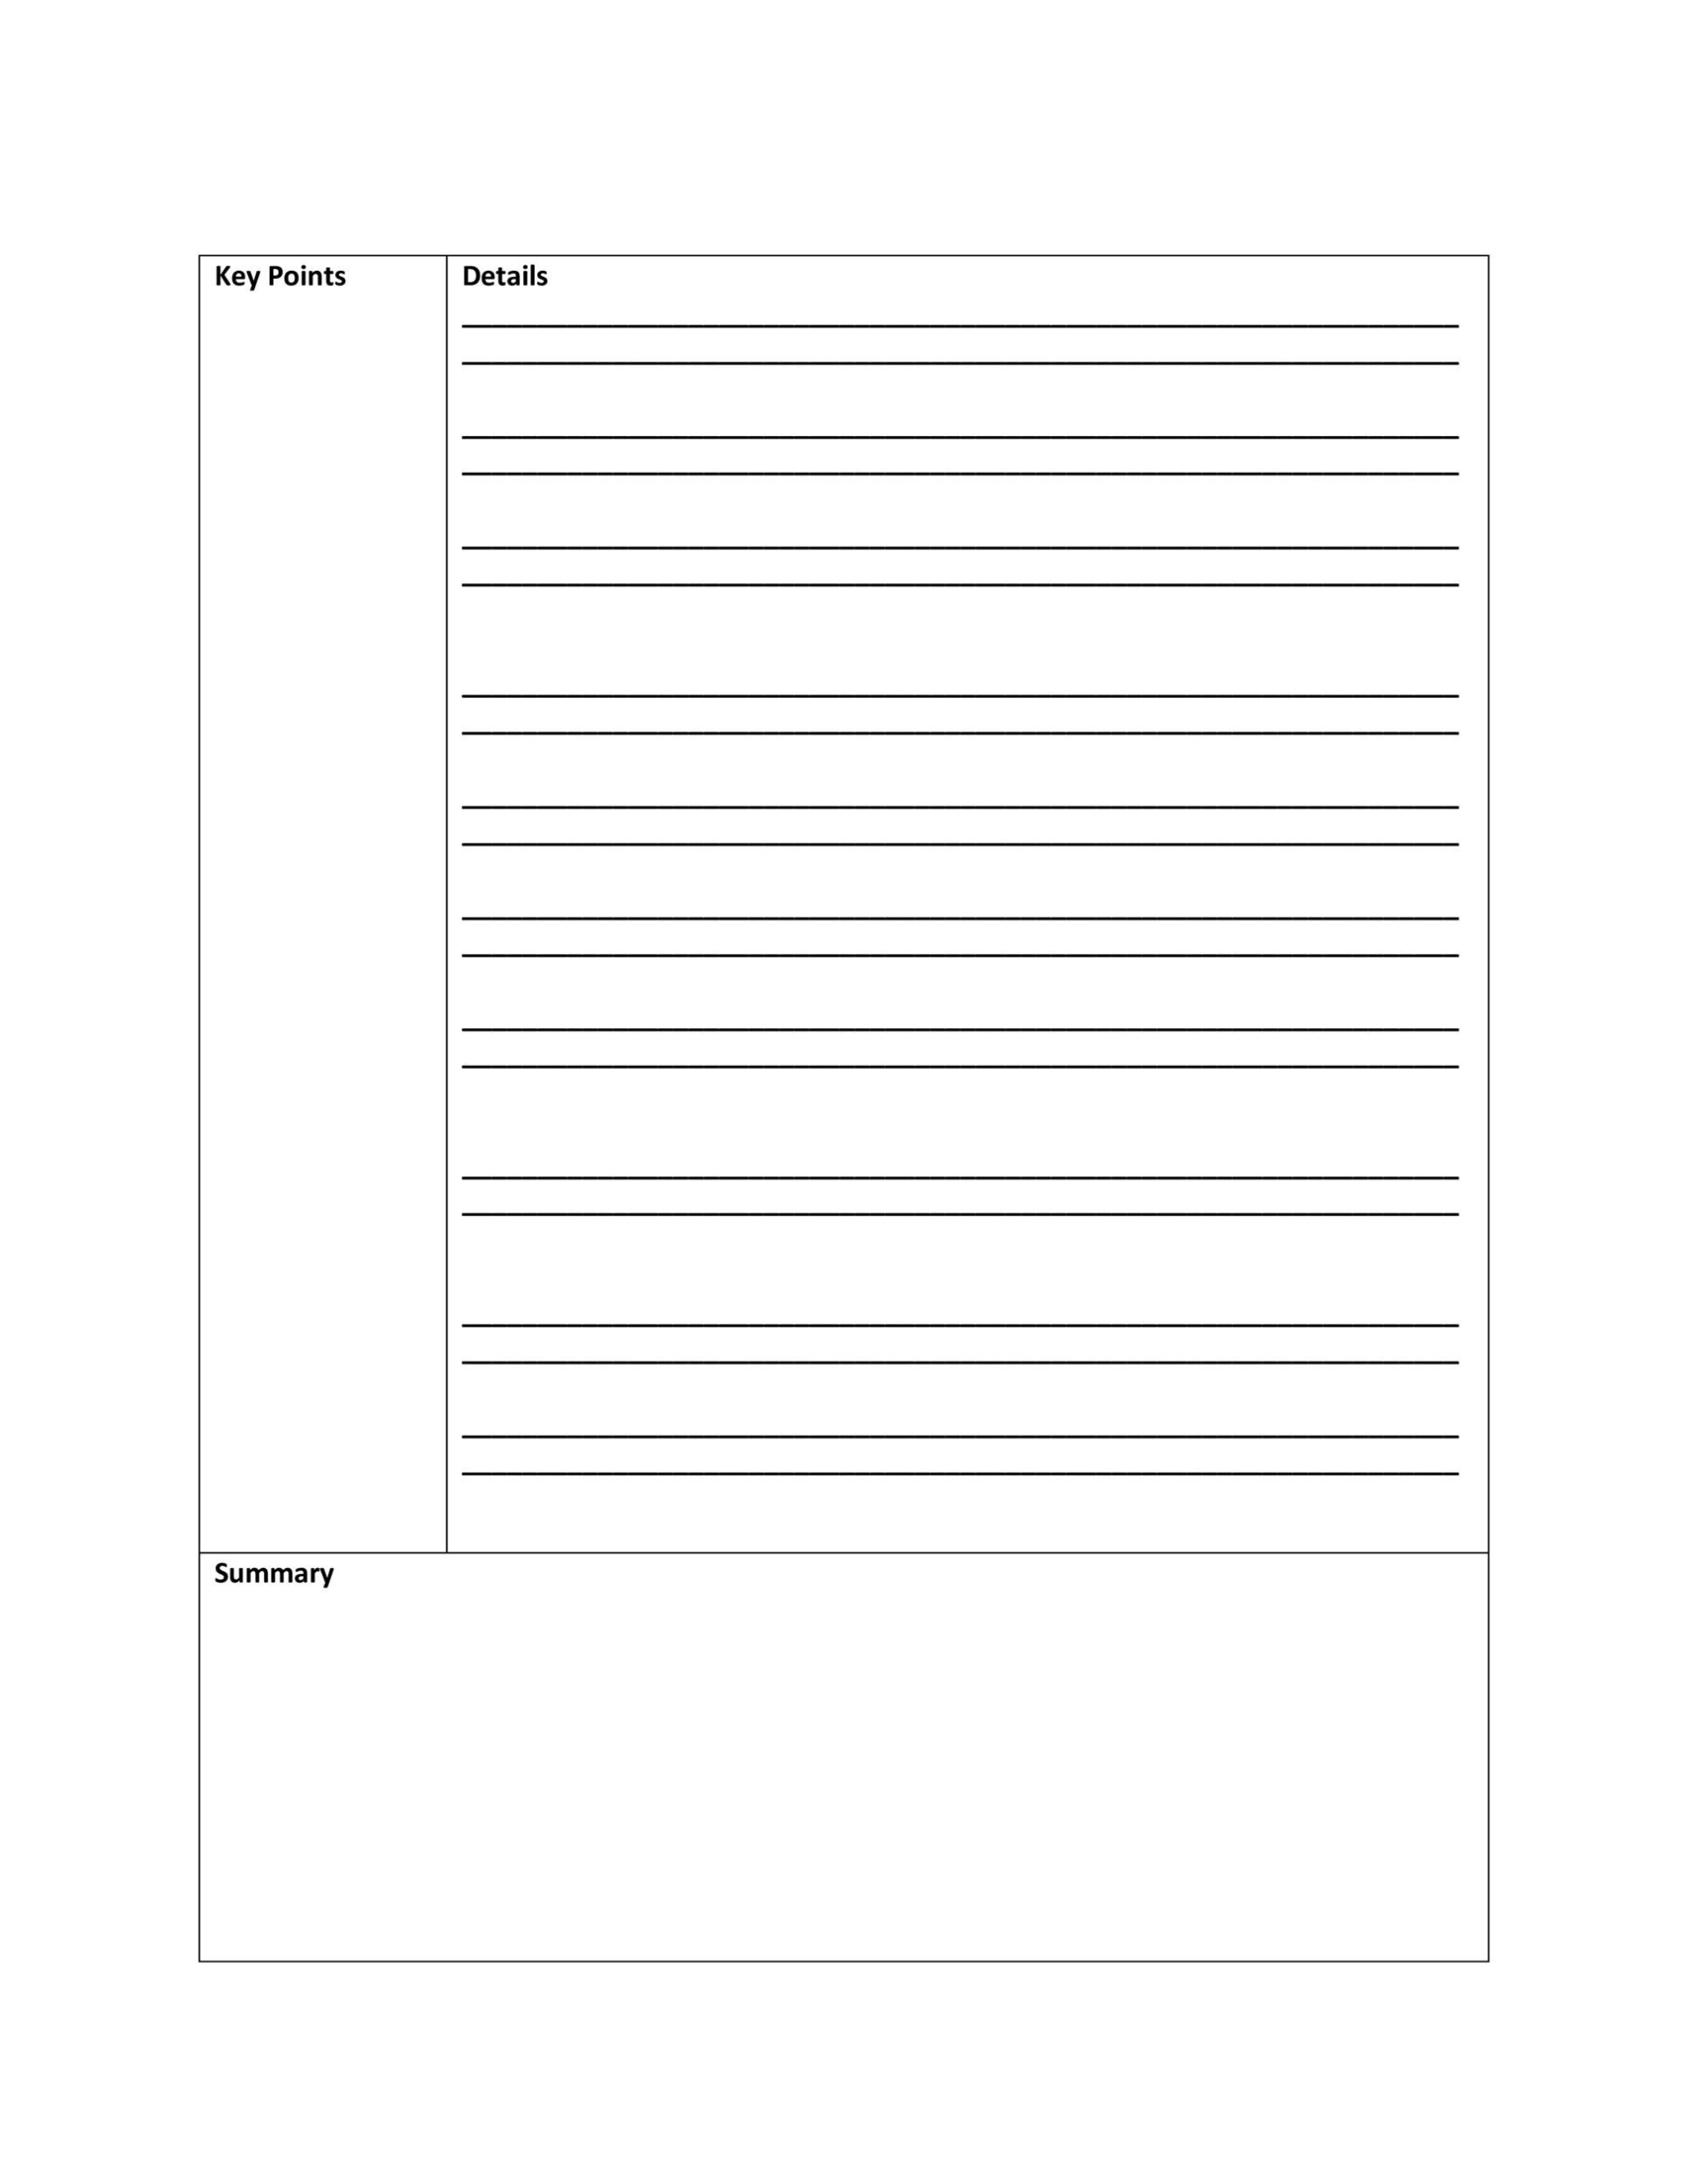 22 Cornell Note Taking Template Word - Free Popular Templates Design pertaining to Note Taking Template Word